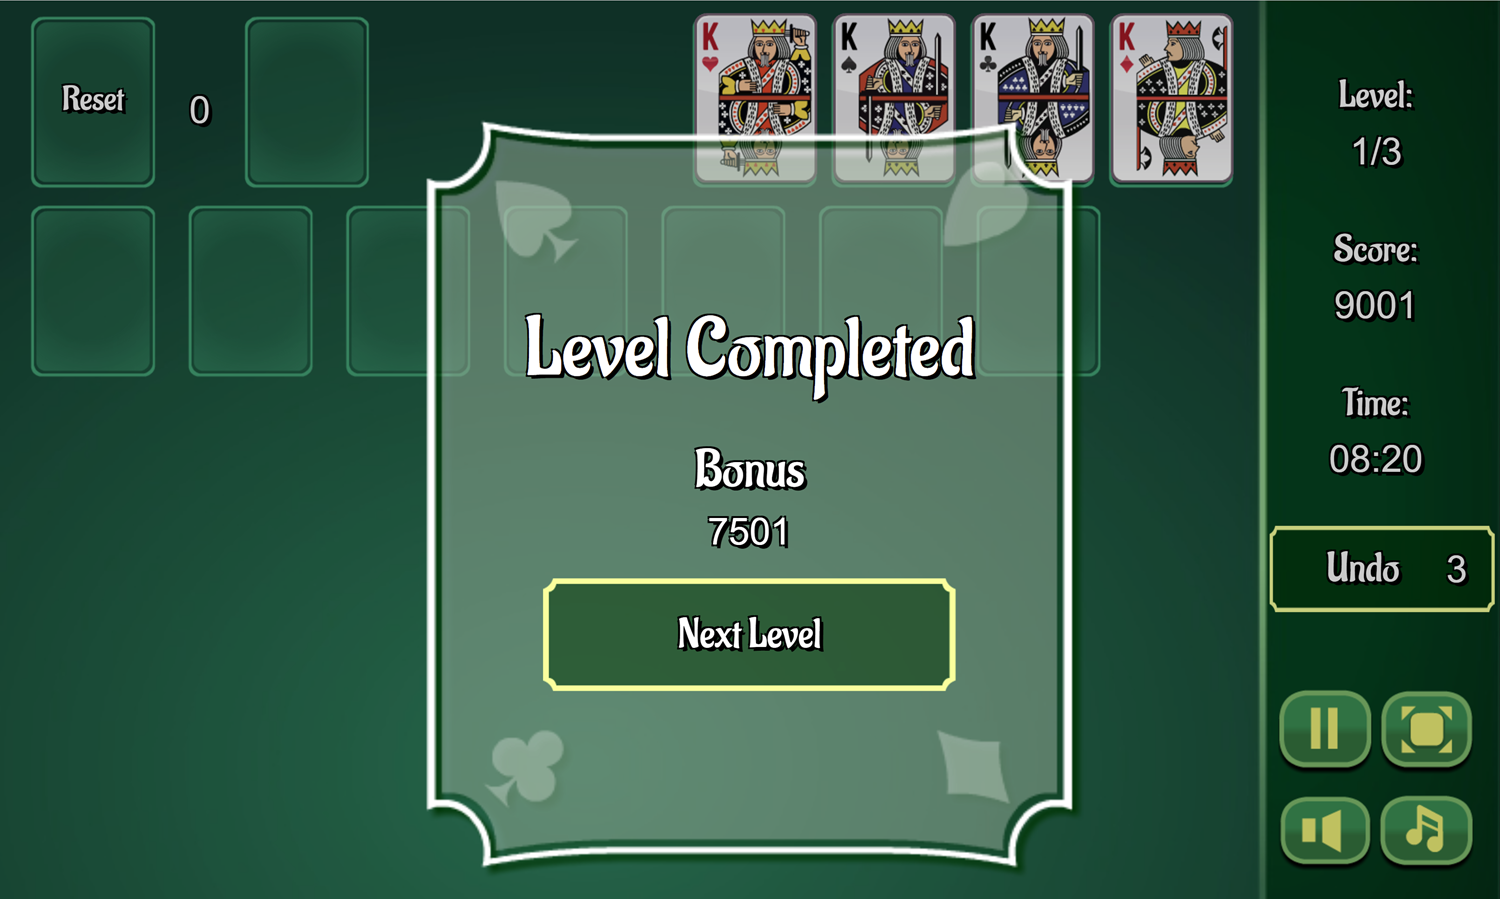 Classic Solitaire Game Level Completed Screen Screenshot.